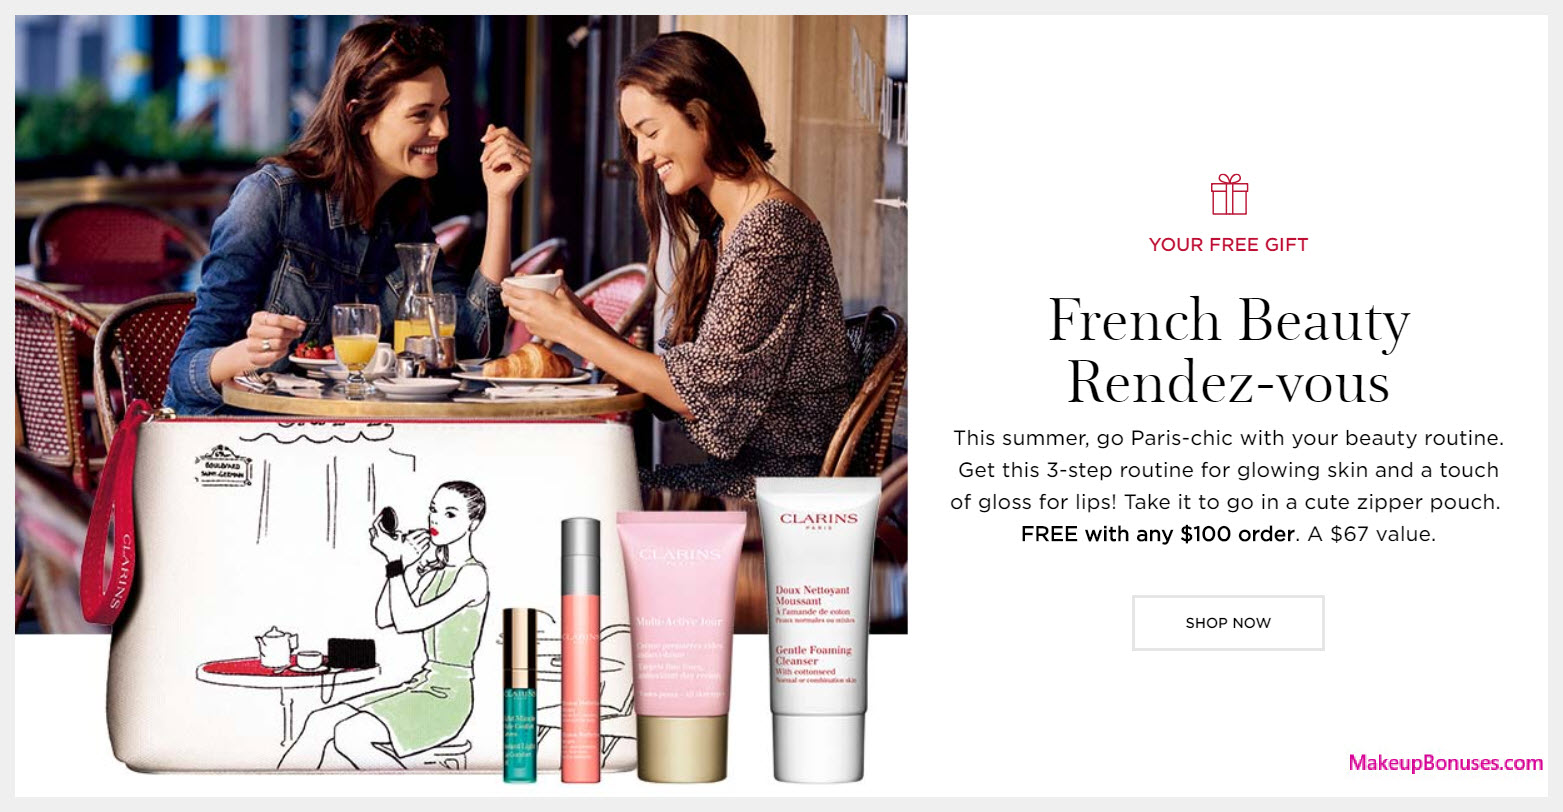 Receive a free 5-pc gift with $100 Clarins purchase